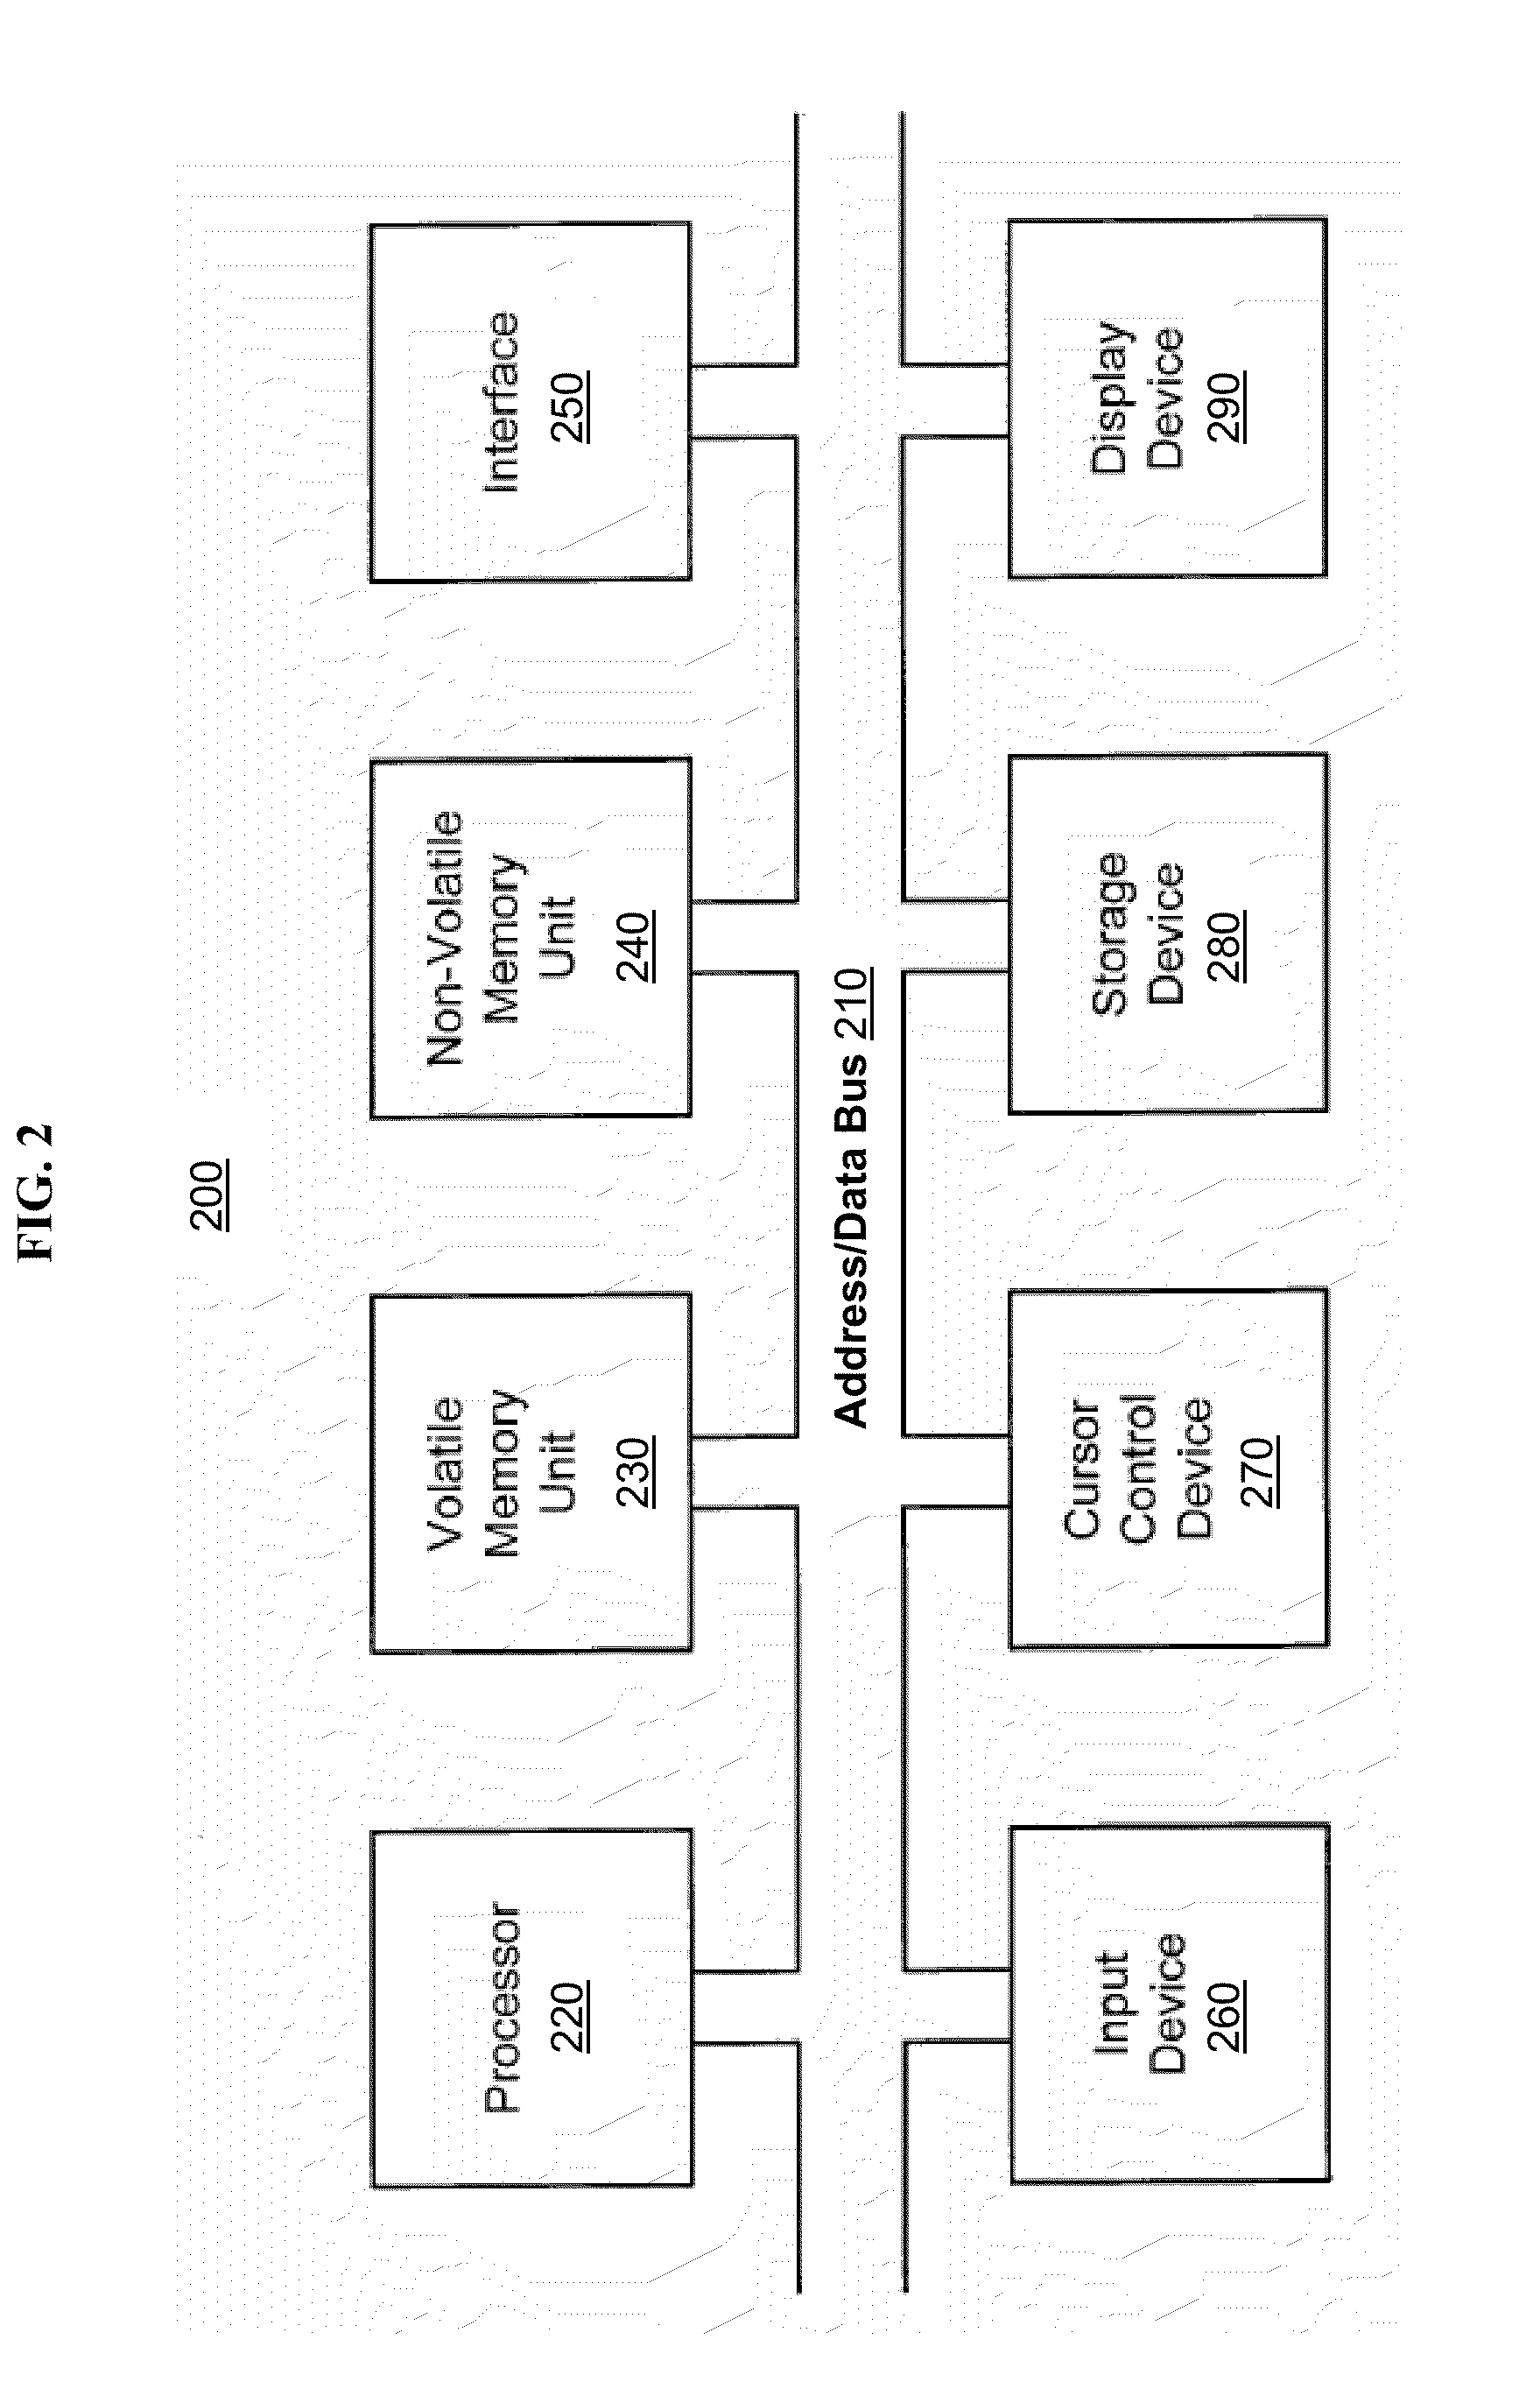 Methods and apparatus for sensing the internal temperature of an electrochemical device